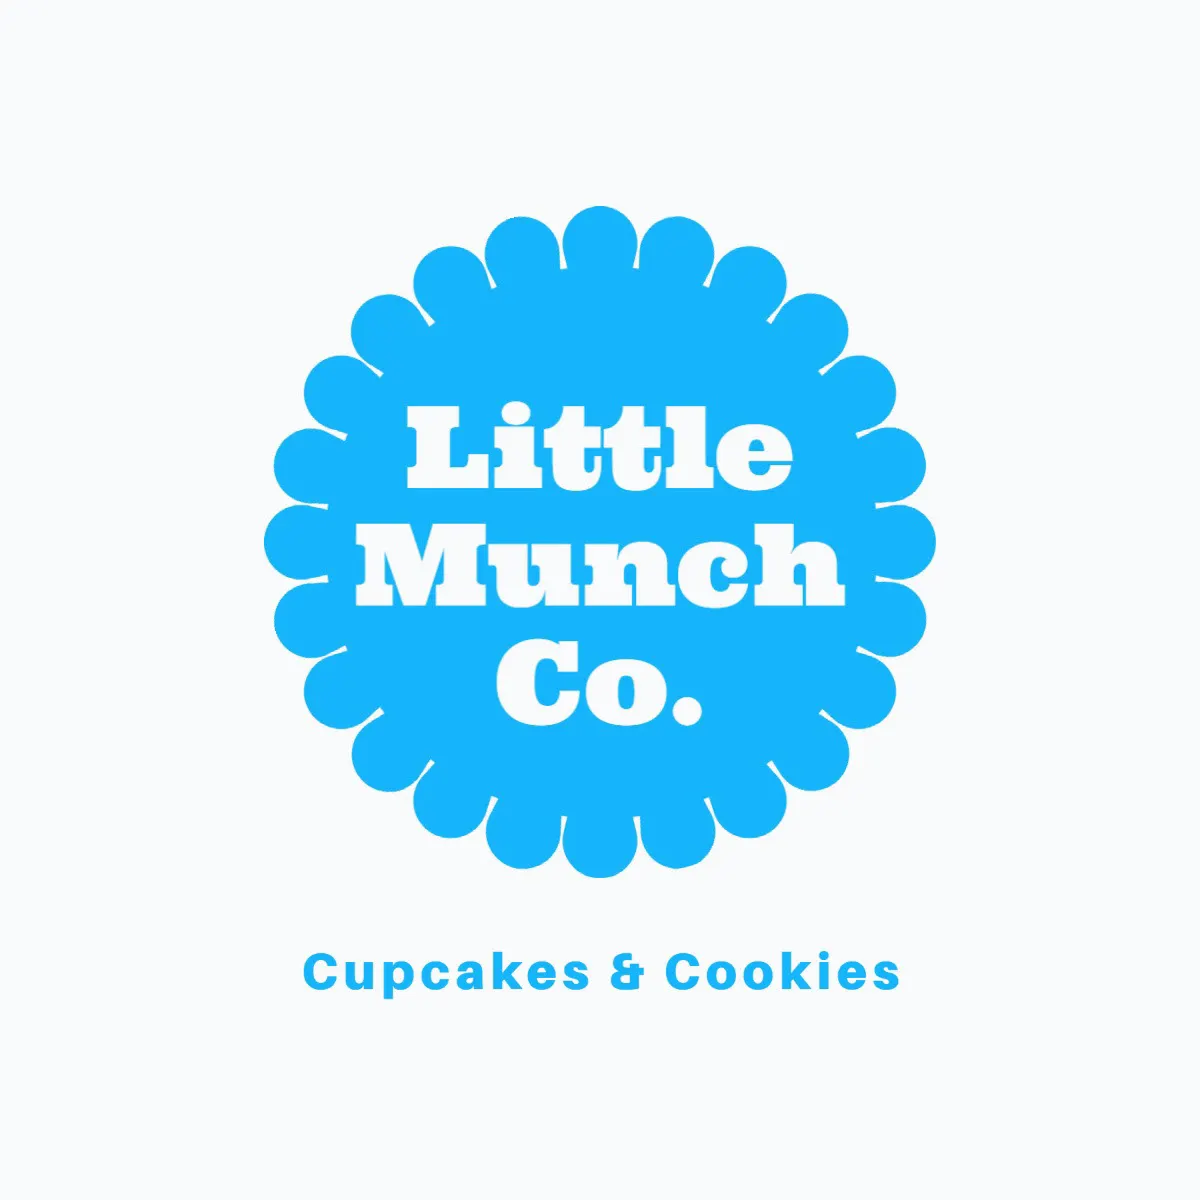 Blue And White Cupcake And Cookie Logo